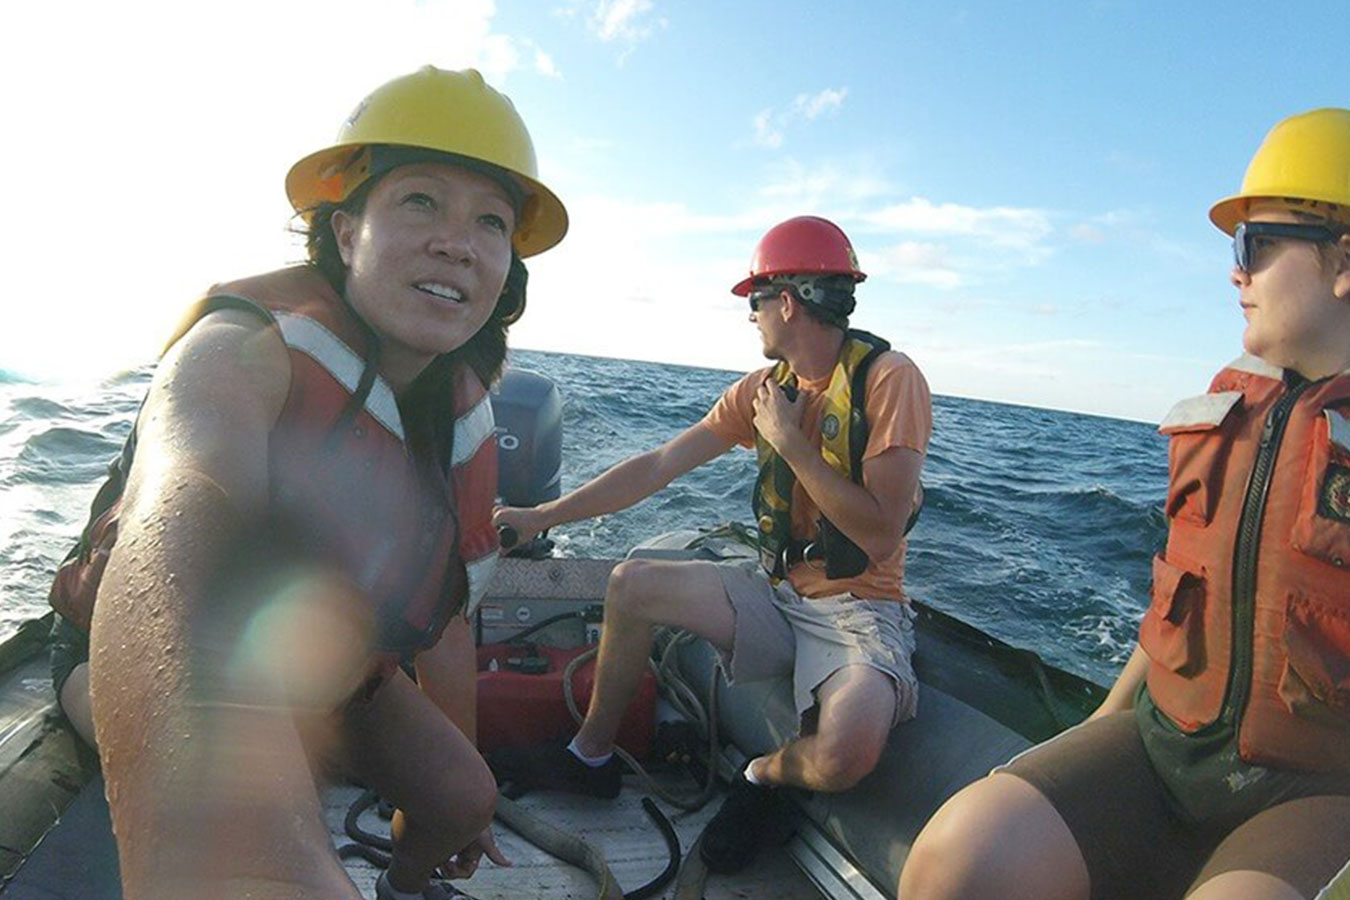 After Hurricane Harvey in 2017, Dr. Nancy Foster Scholar Andrea Kealoha and her colleagues at Texas A&M University collected water samples in the Gulf of Mexico that were analyzed to determine the hurricane’s impact on the ocean. Collecting localized data is important in developing climate vulnerability assessments unique to specific places. Photo: Andrea Kealoha